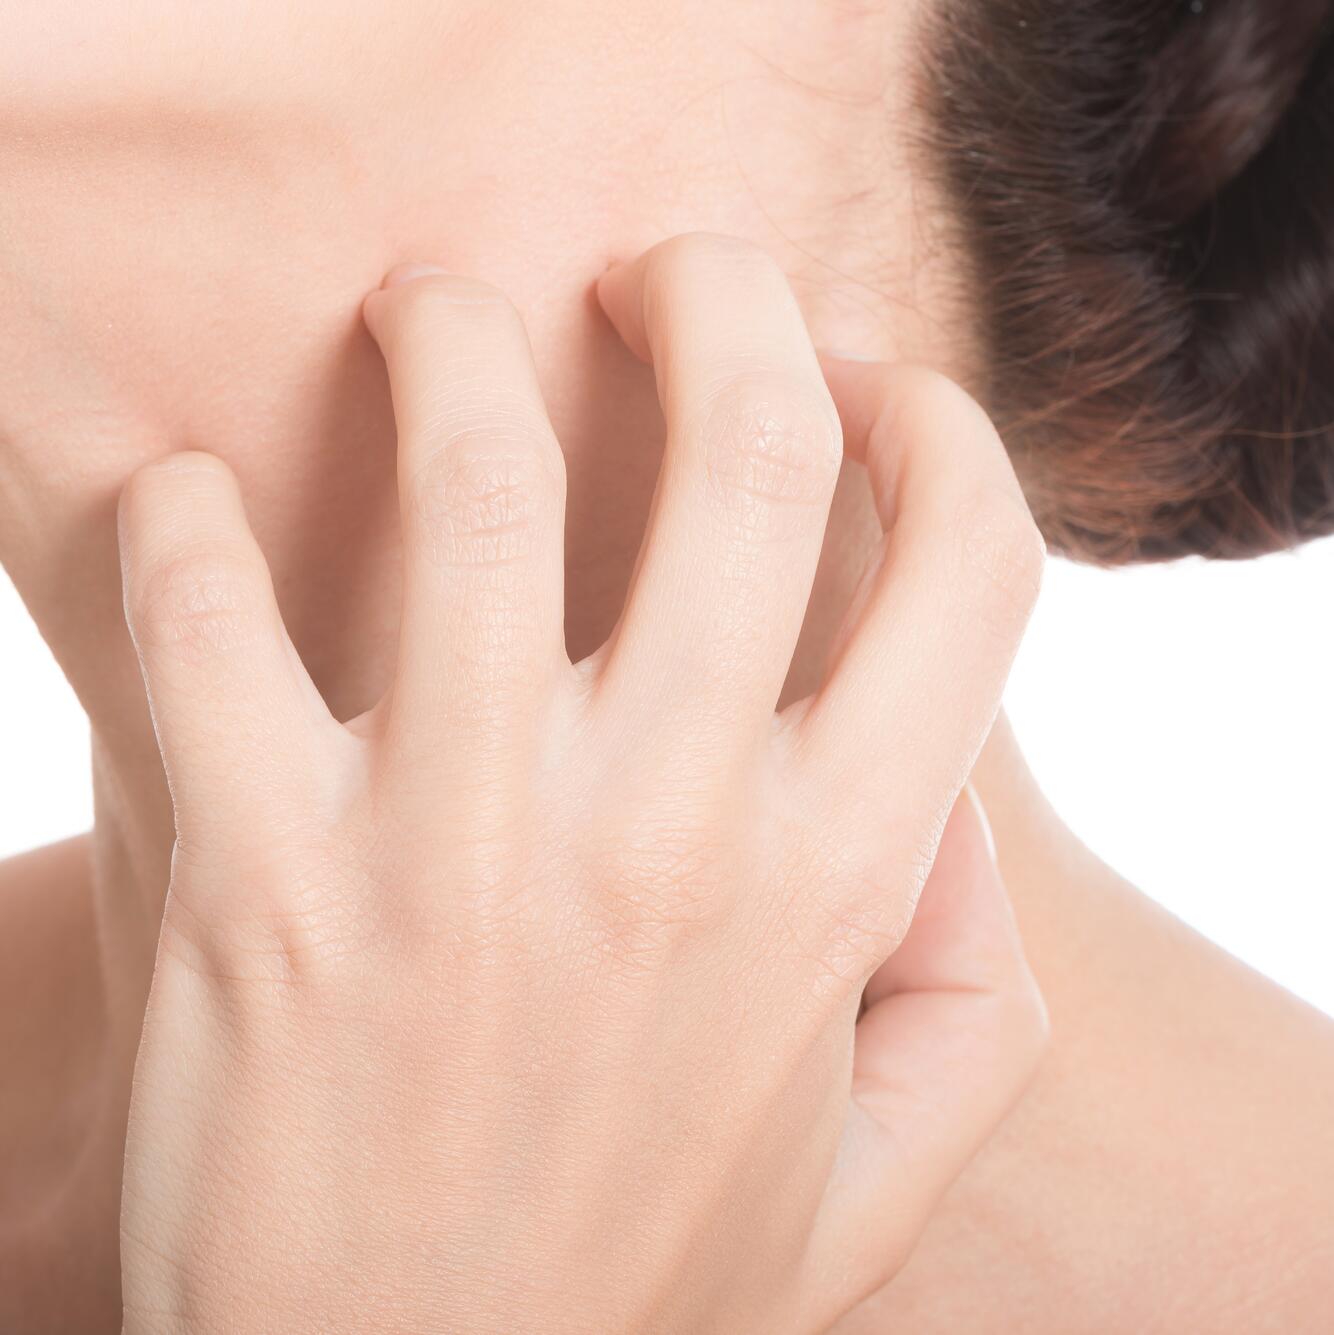 AD_ATOPIE_WOMAN-SCRATCHING-NECK_LARGE_2021 492x492